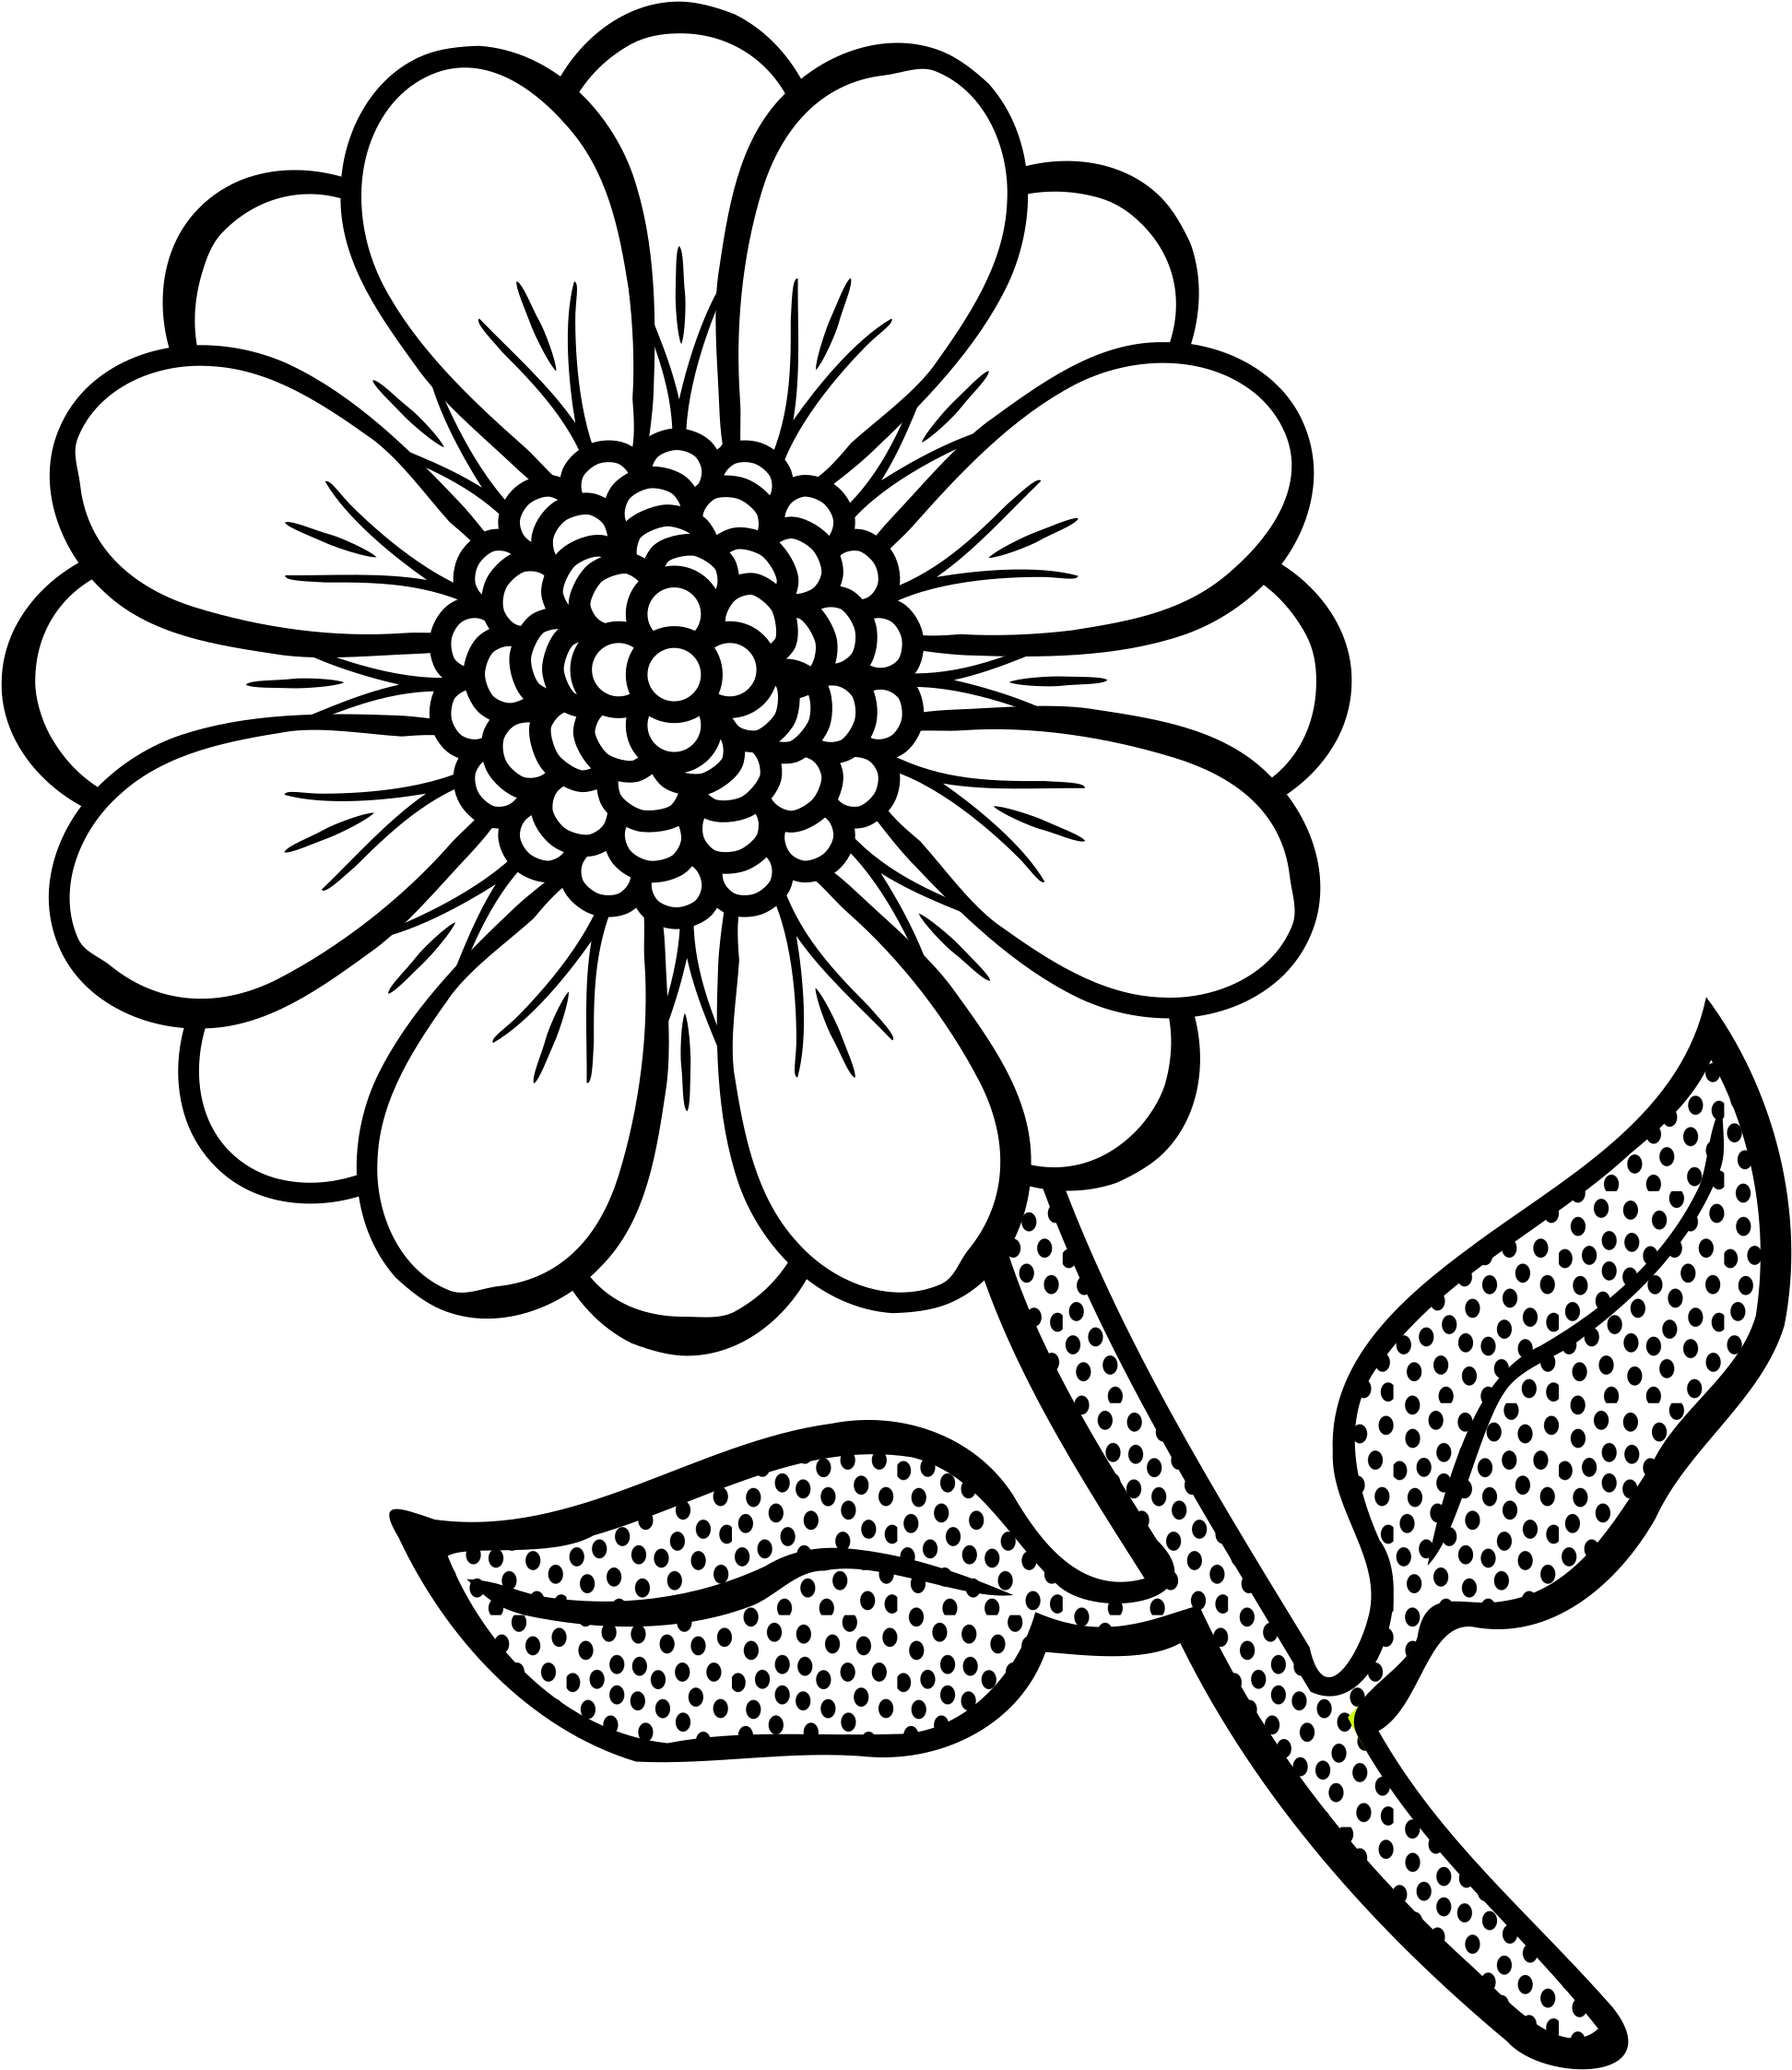 A White Flower With Black Dots